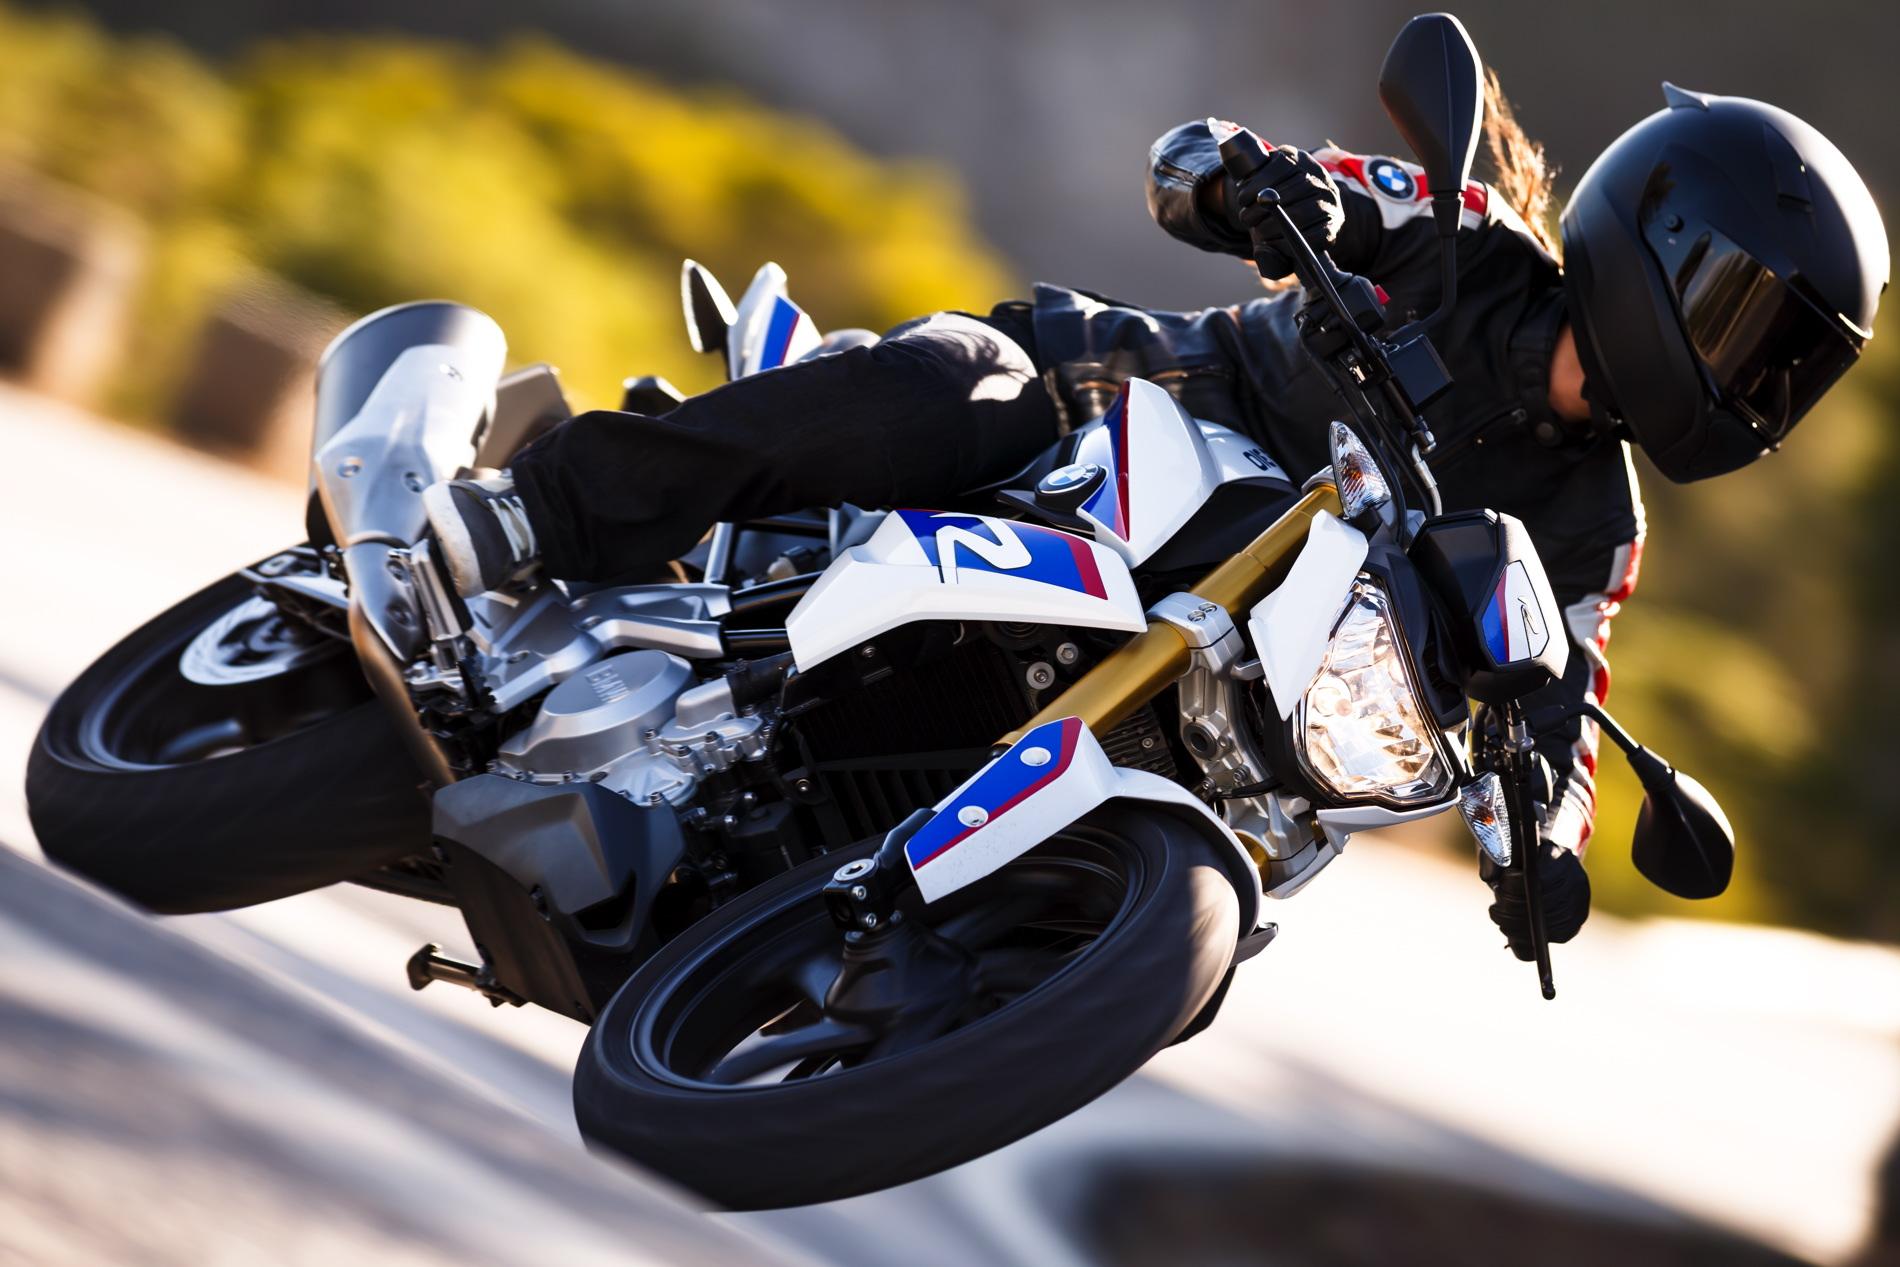 The G 310 R: A BMW For Learners?